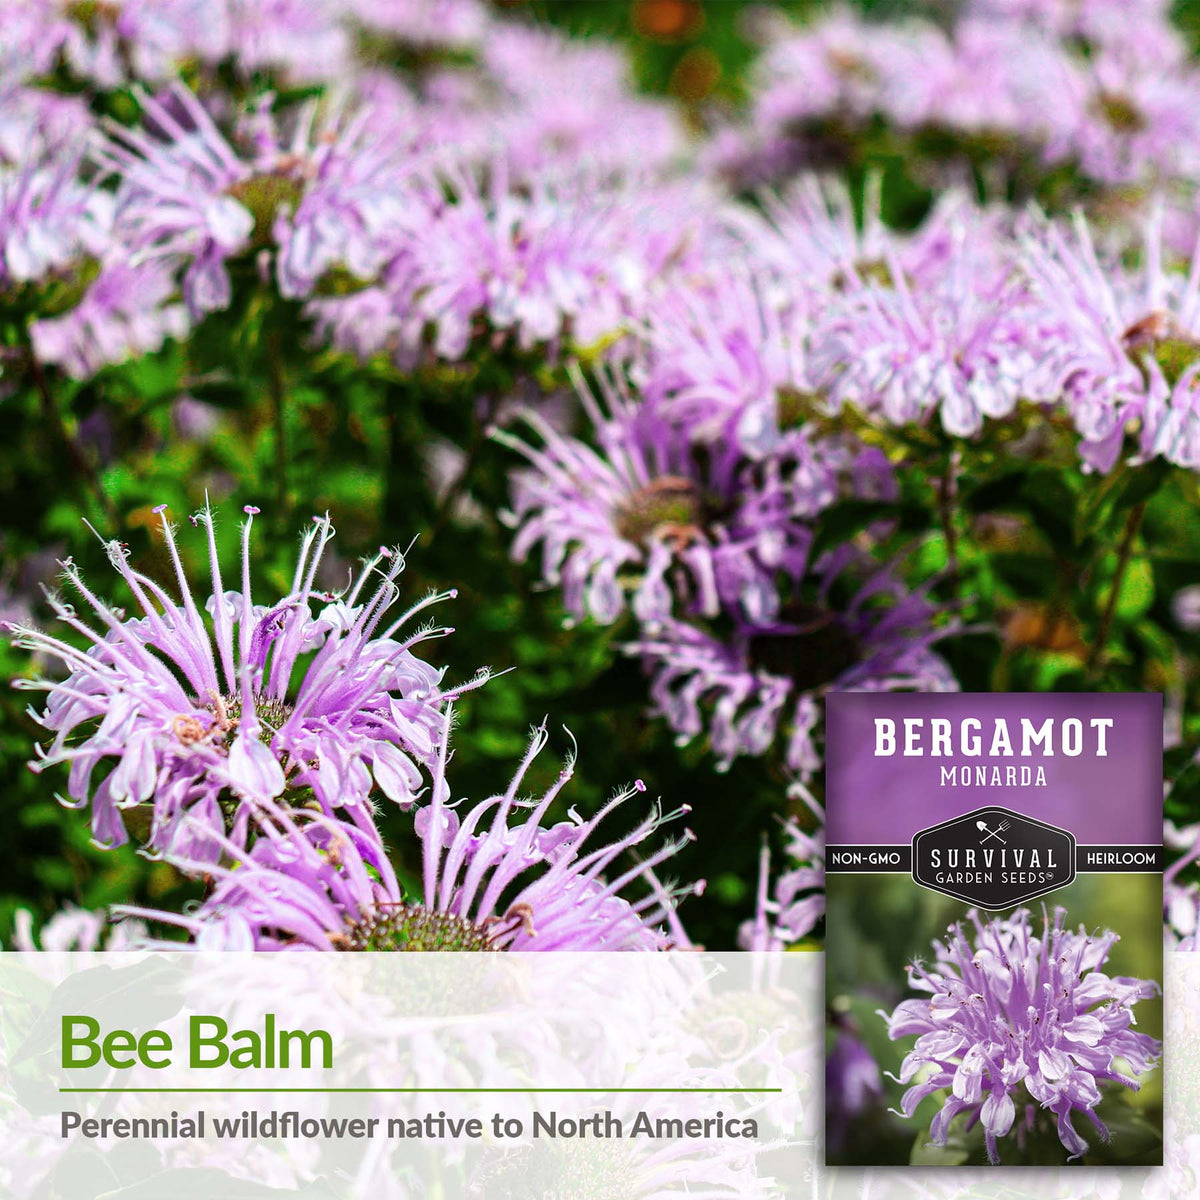 Bergamot also known as bee balm is a perennial wildflower